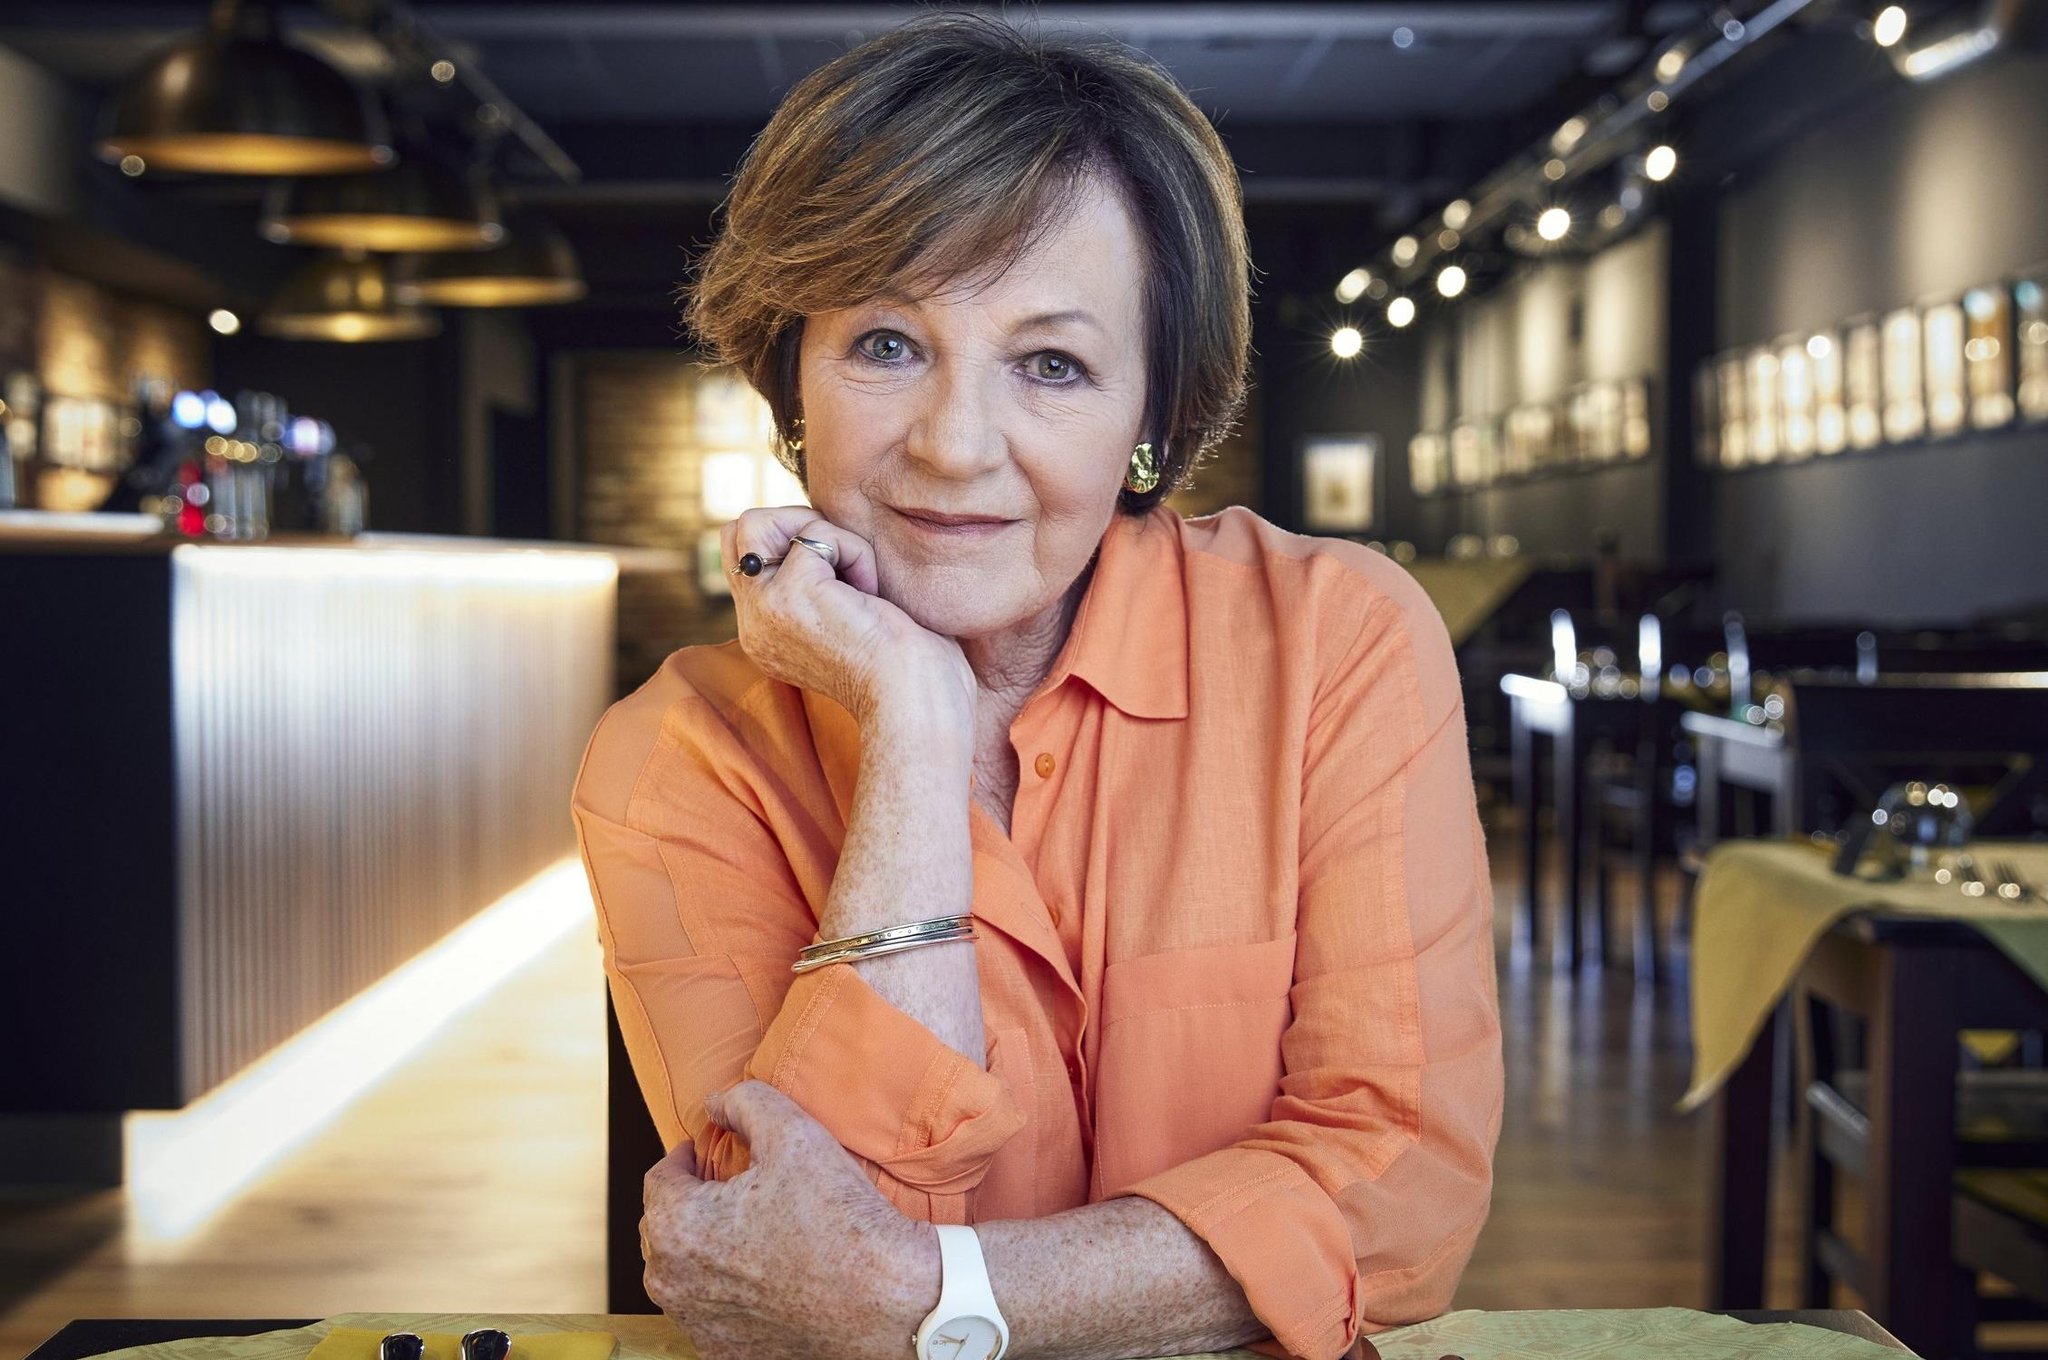 Iconic TV cook Delia Smith has a new book on spirituality